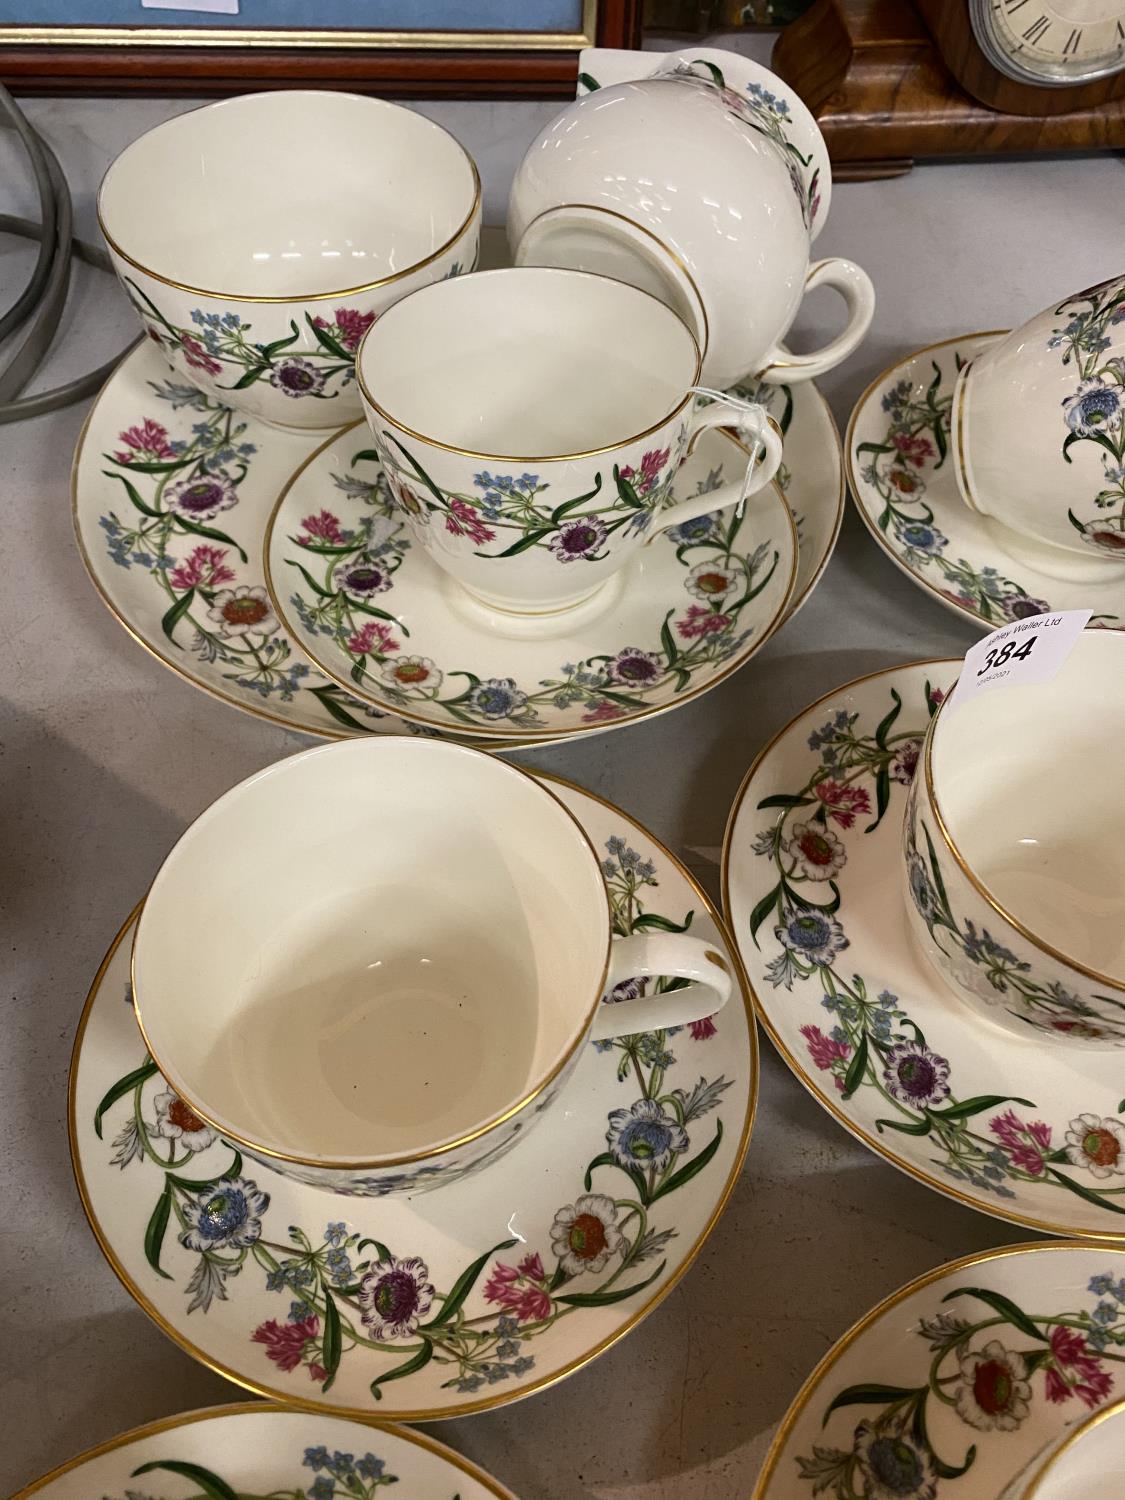 A ROYAL WORCESTER TEA SET OF SIX CUPS/SAUCERS INCLUDING A CREAM JUG,SUGAR BOWL AND SERVING PLATE - Image 3 of 3